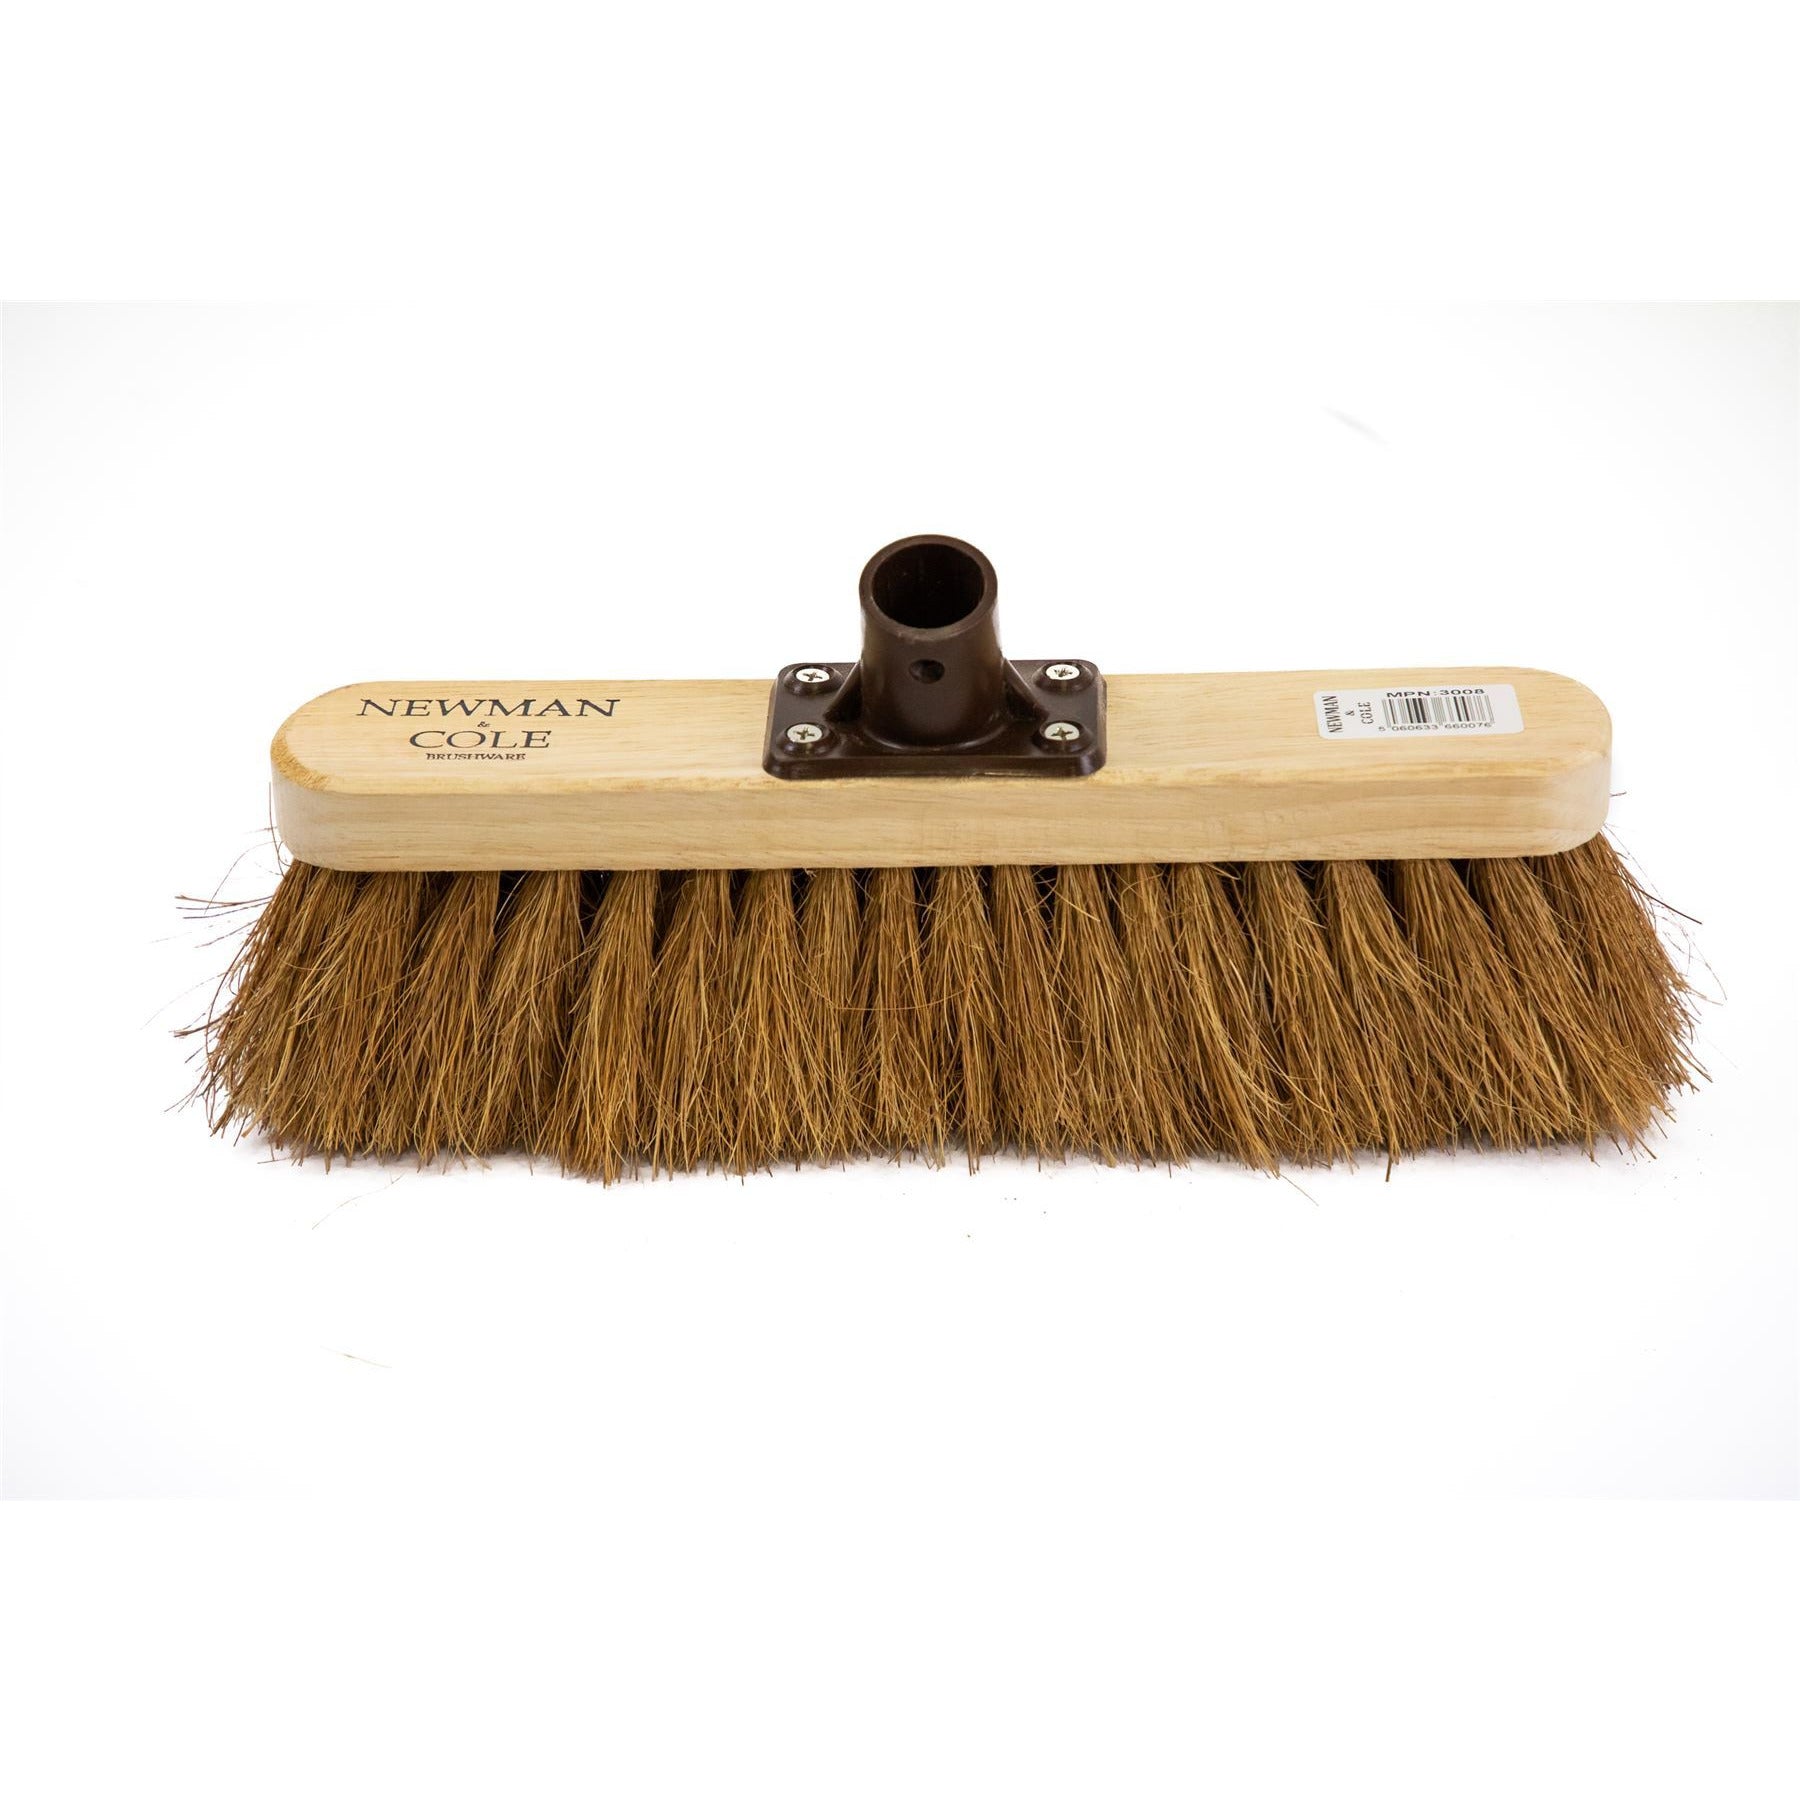 Newman and Cole 12" Natural Coco Broom Head with Plastic Socket Supplied with Handle - The Dustpan and Brush Store